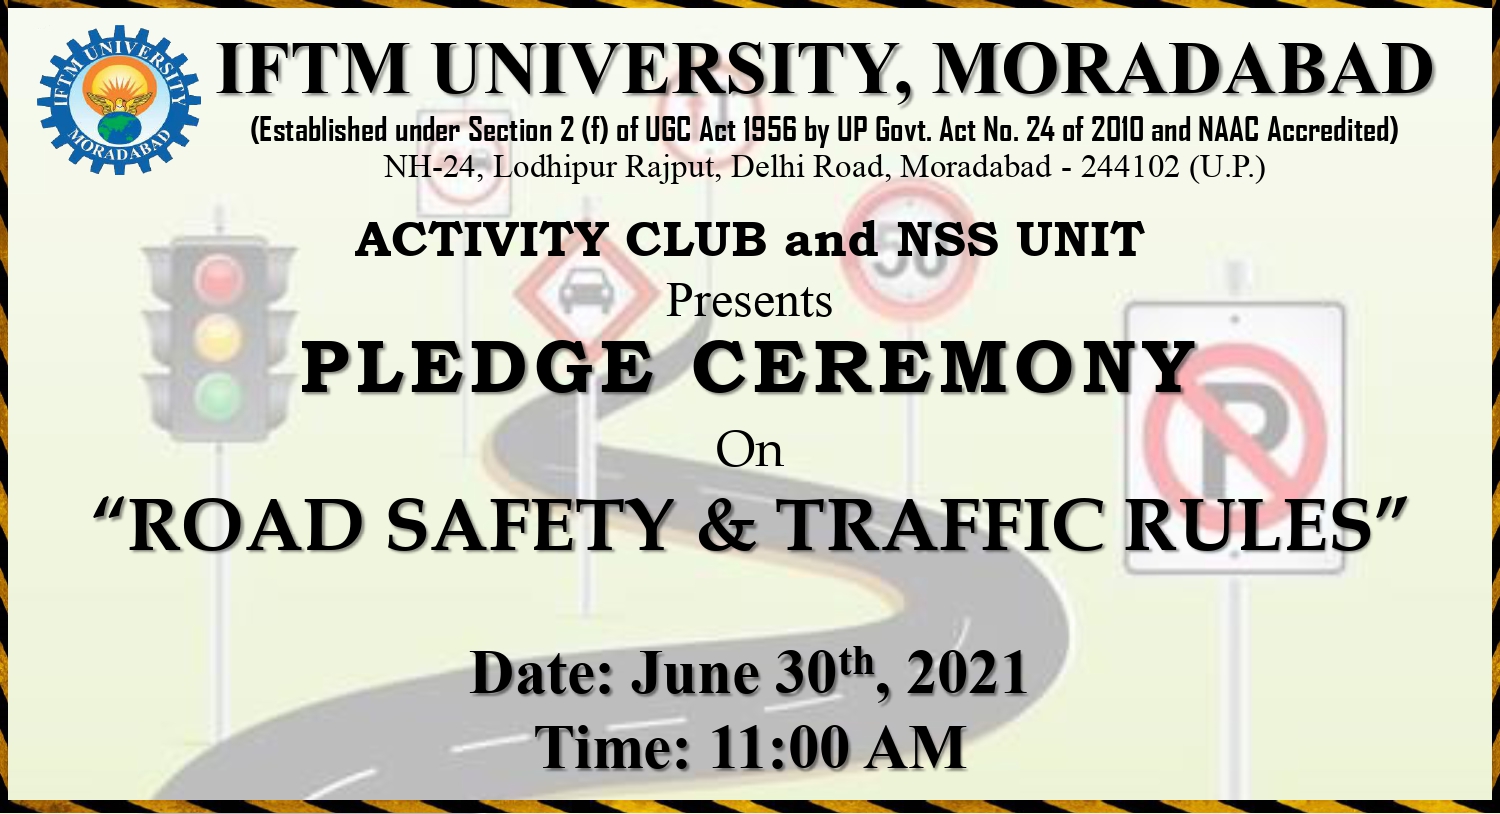 Pledge ceremony on Road Safety and Traffic Rules